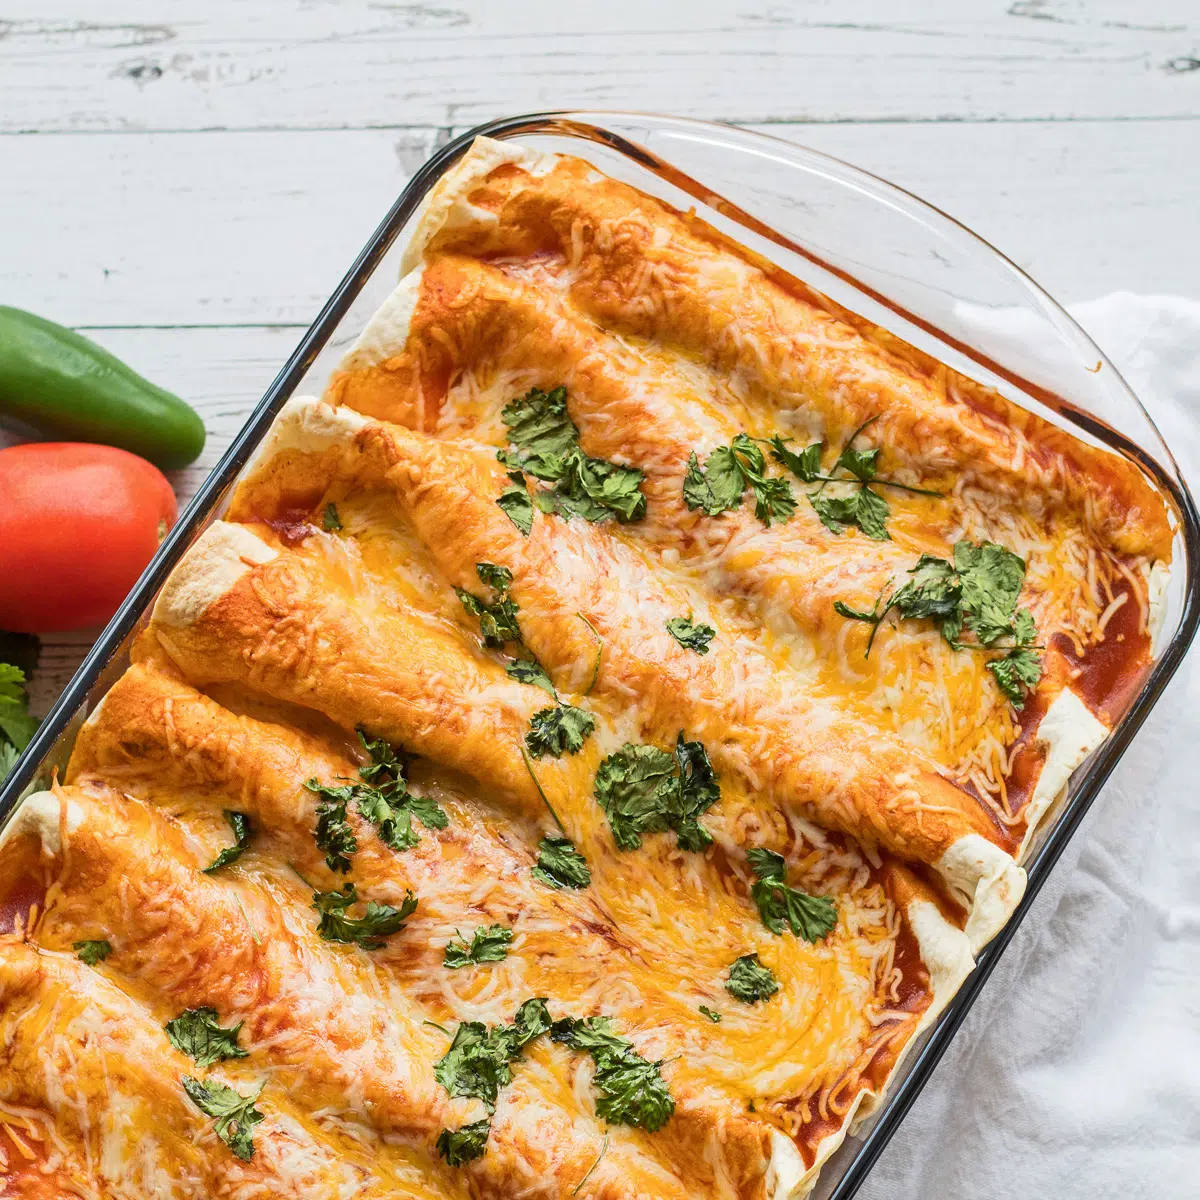 What-To-Serve-With-Enchiladas-best-side-dishes-for-dinner.